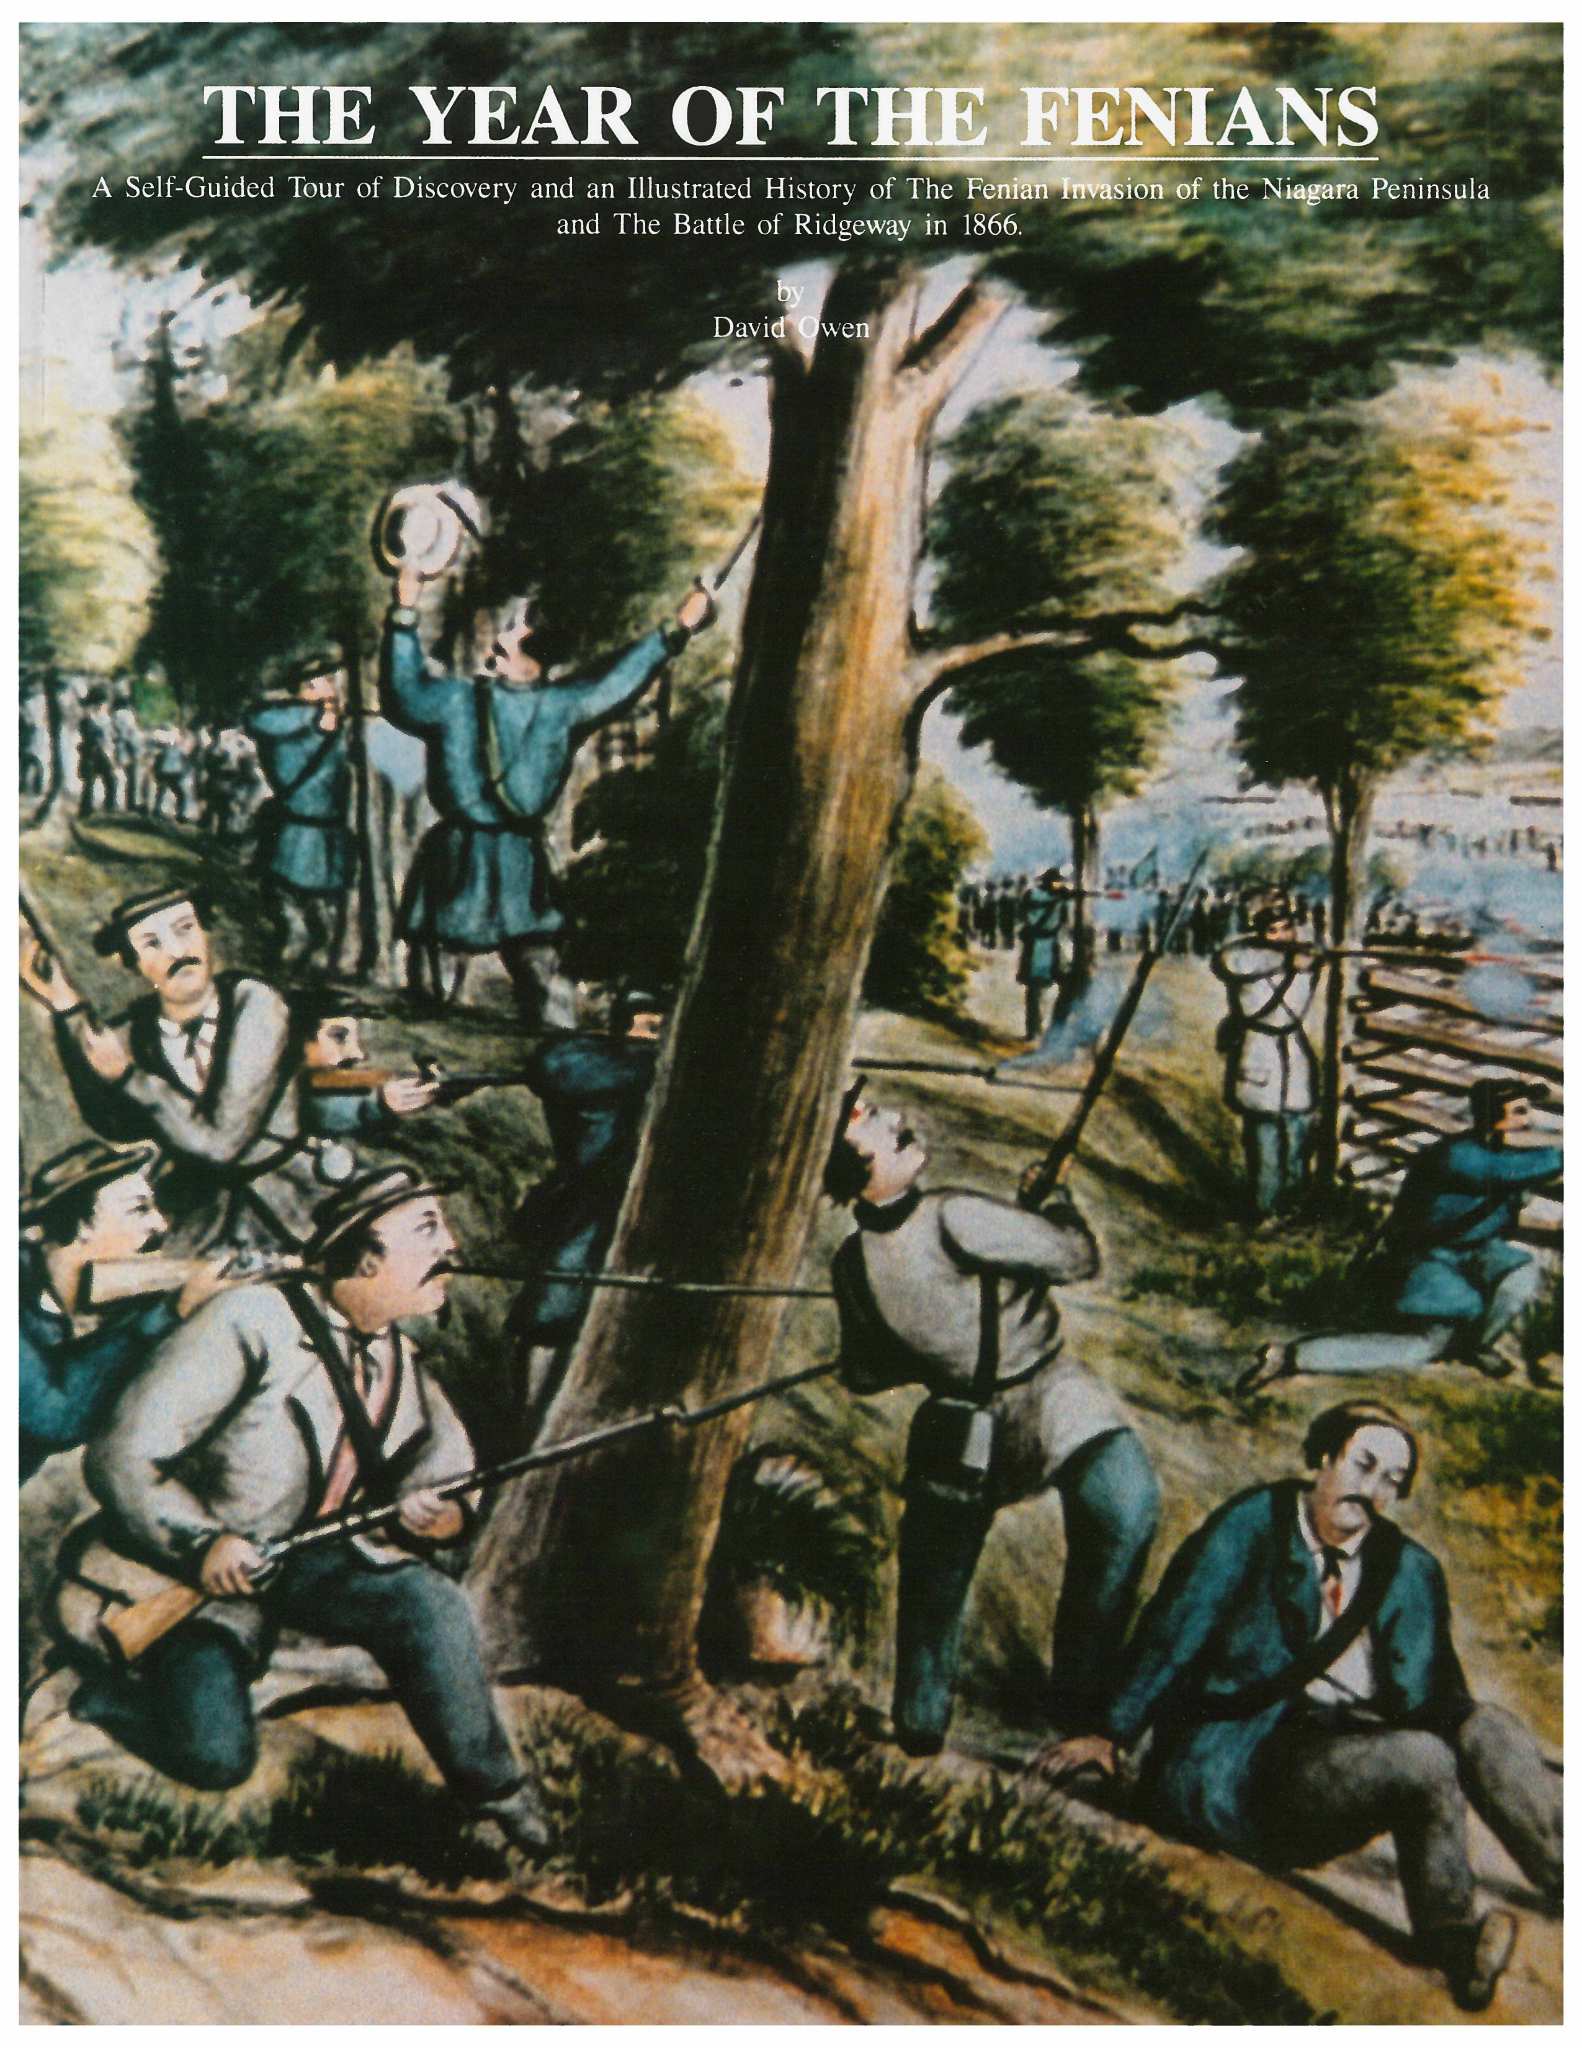 A book cover with a drawing of the Battle of Ridgeway